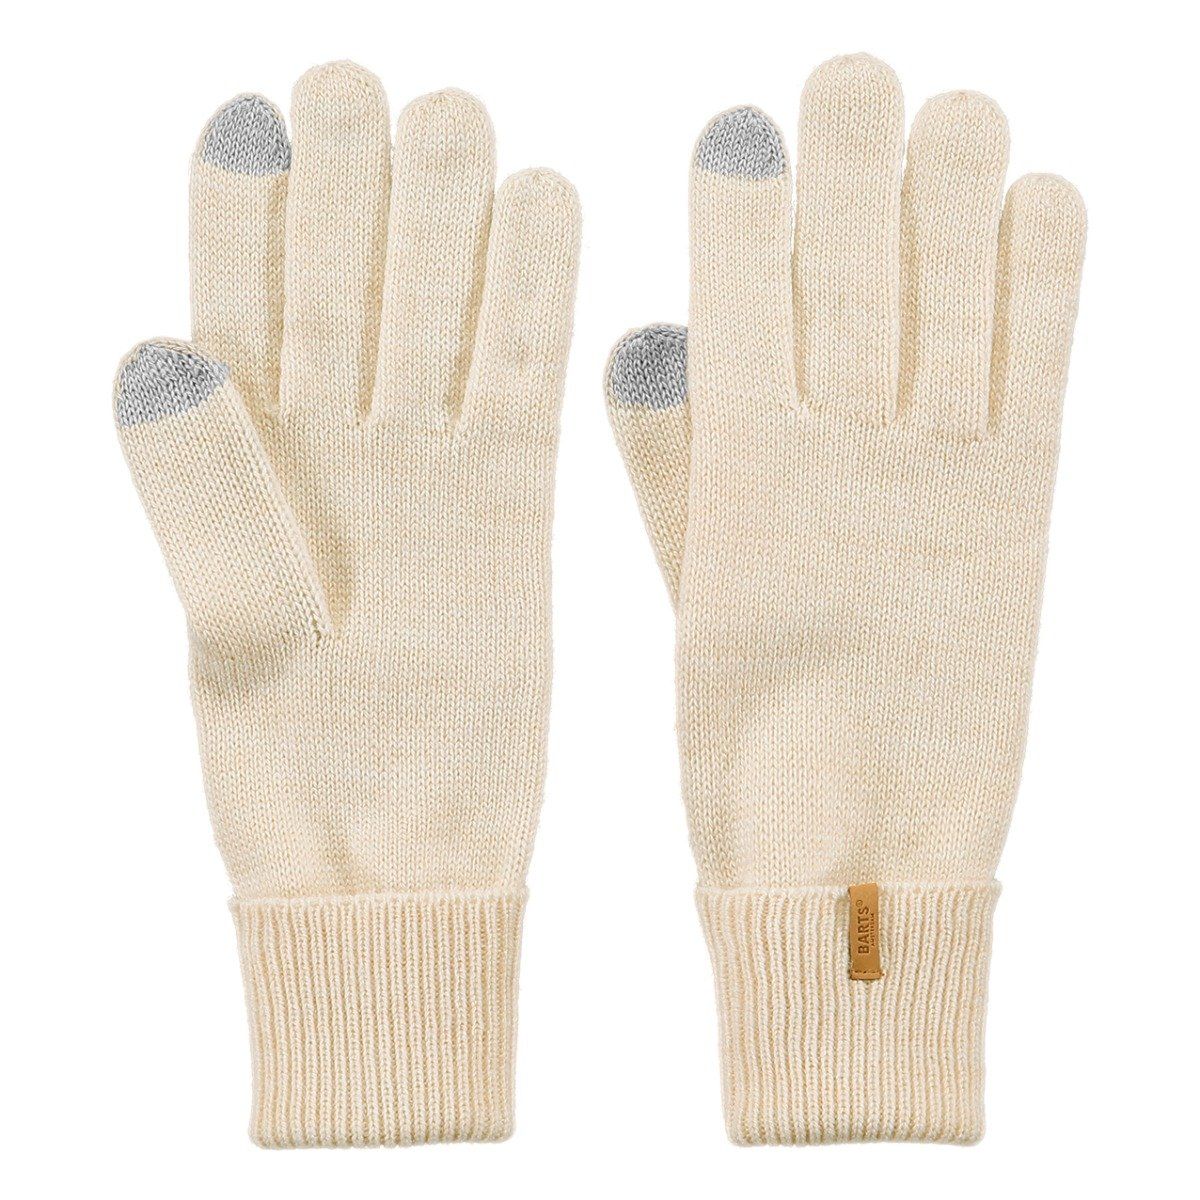 Barts - W's Soft Touch Gloves